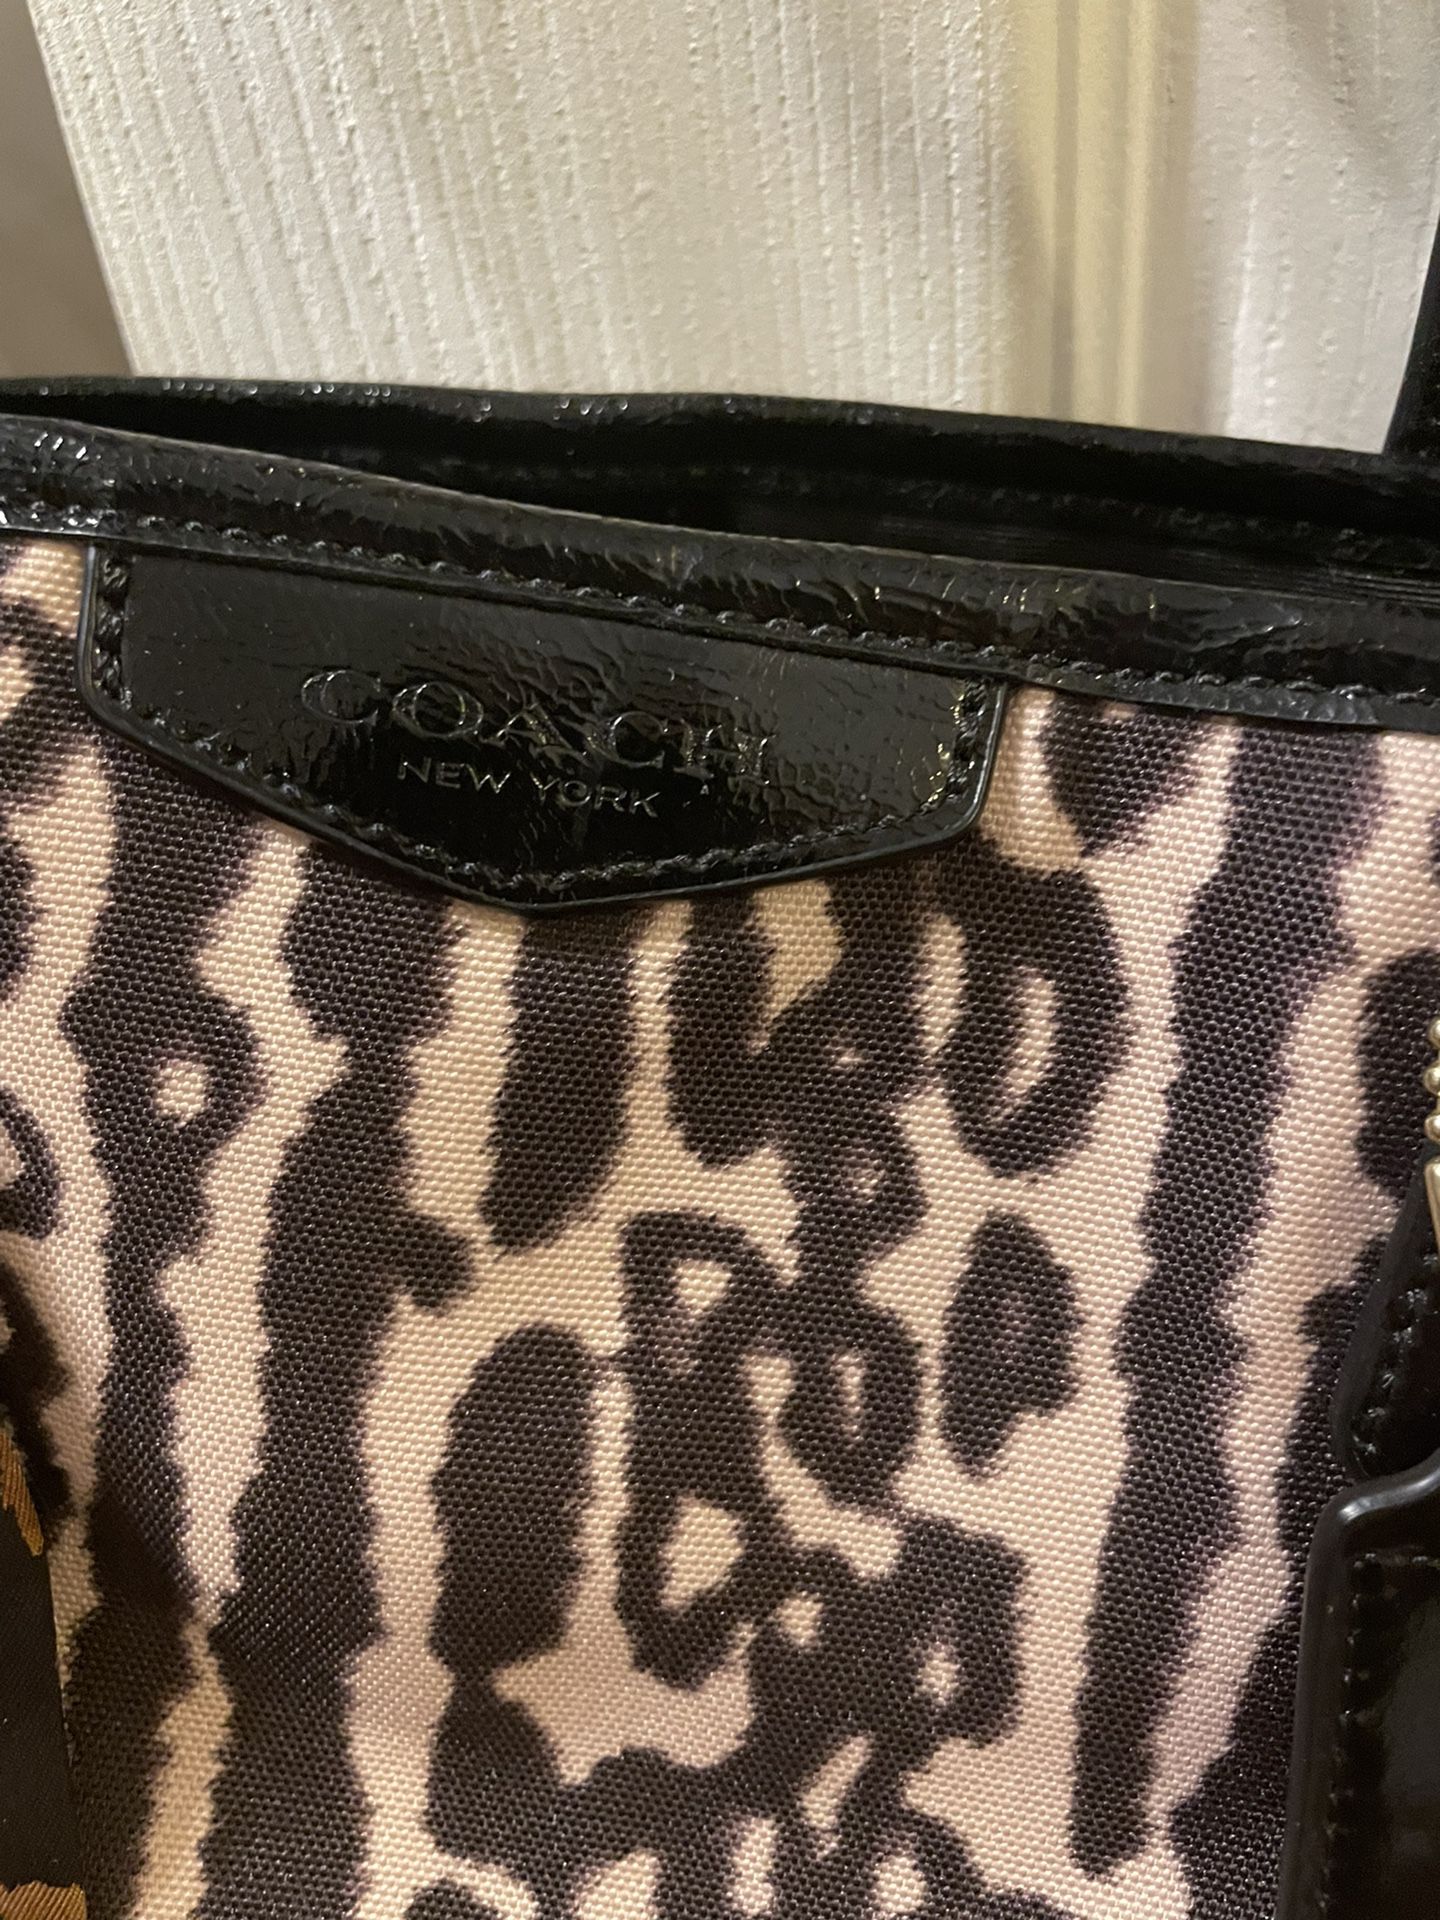 Authentic coach purse with matching coach wallet